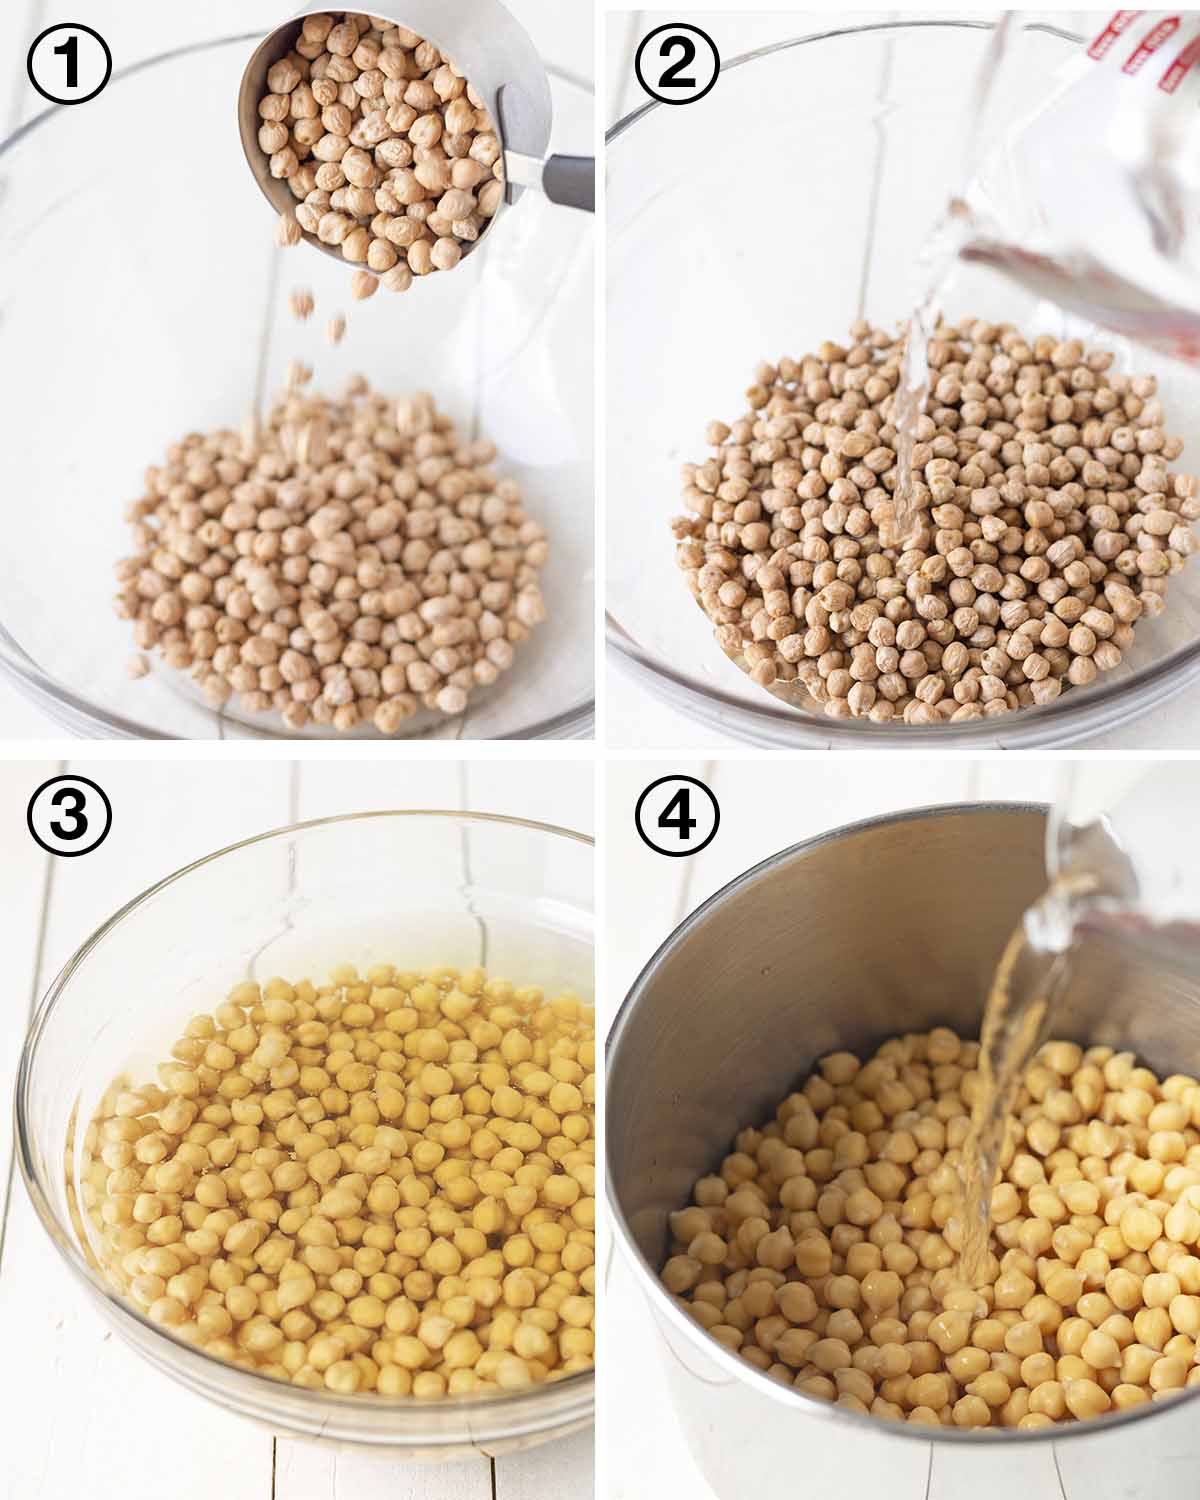 A collage of four images showing the progression of the steps needed to make homemade aquafaba.